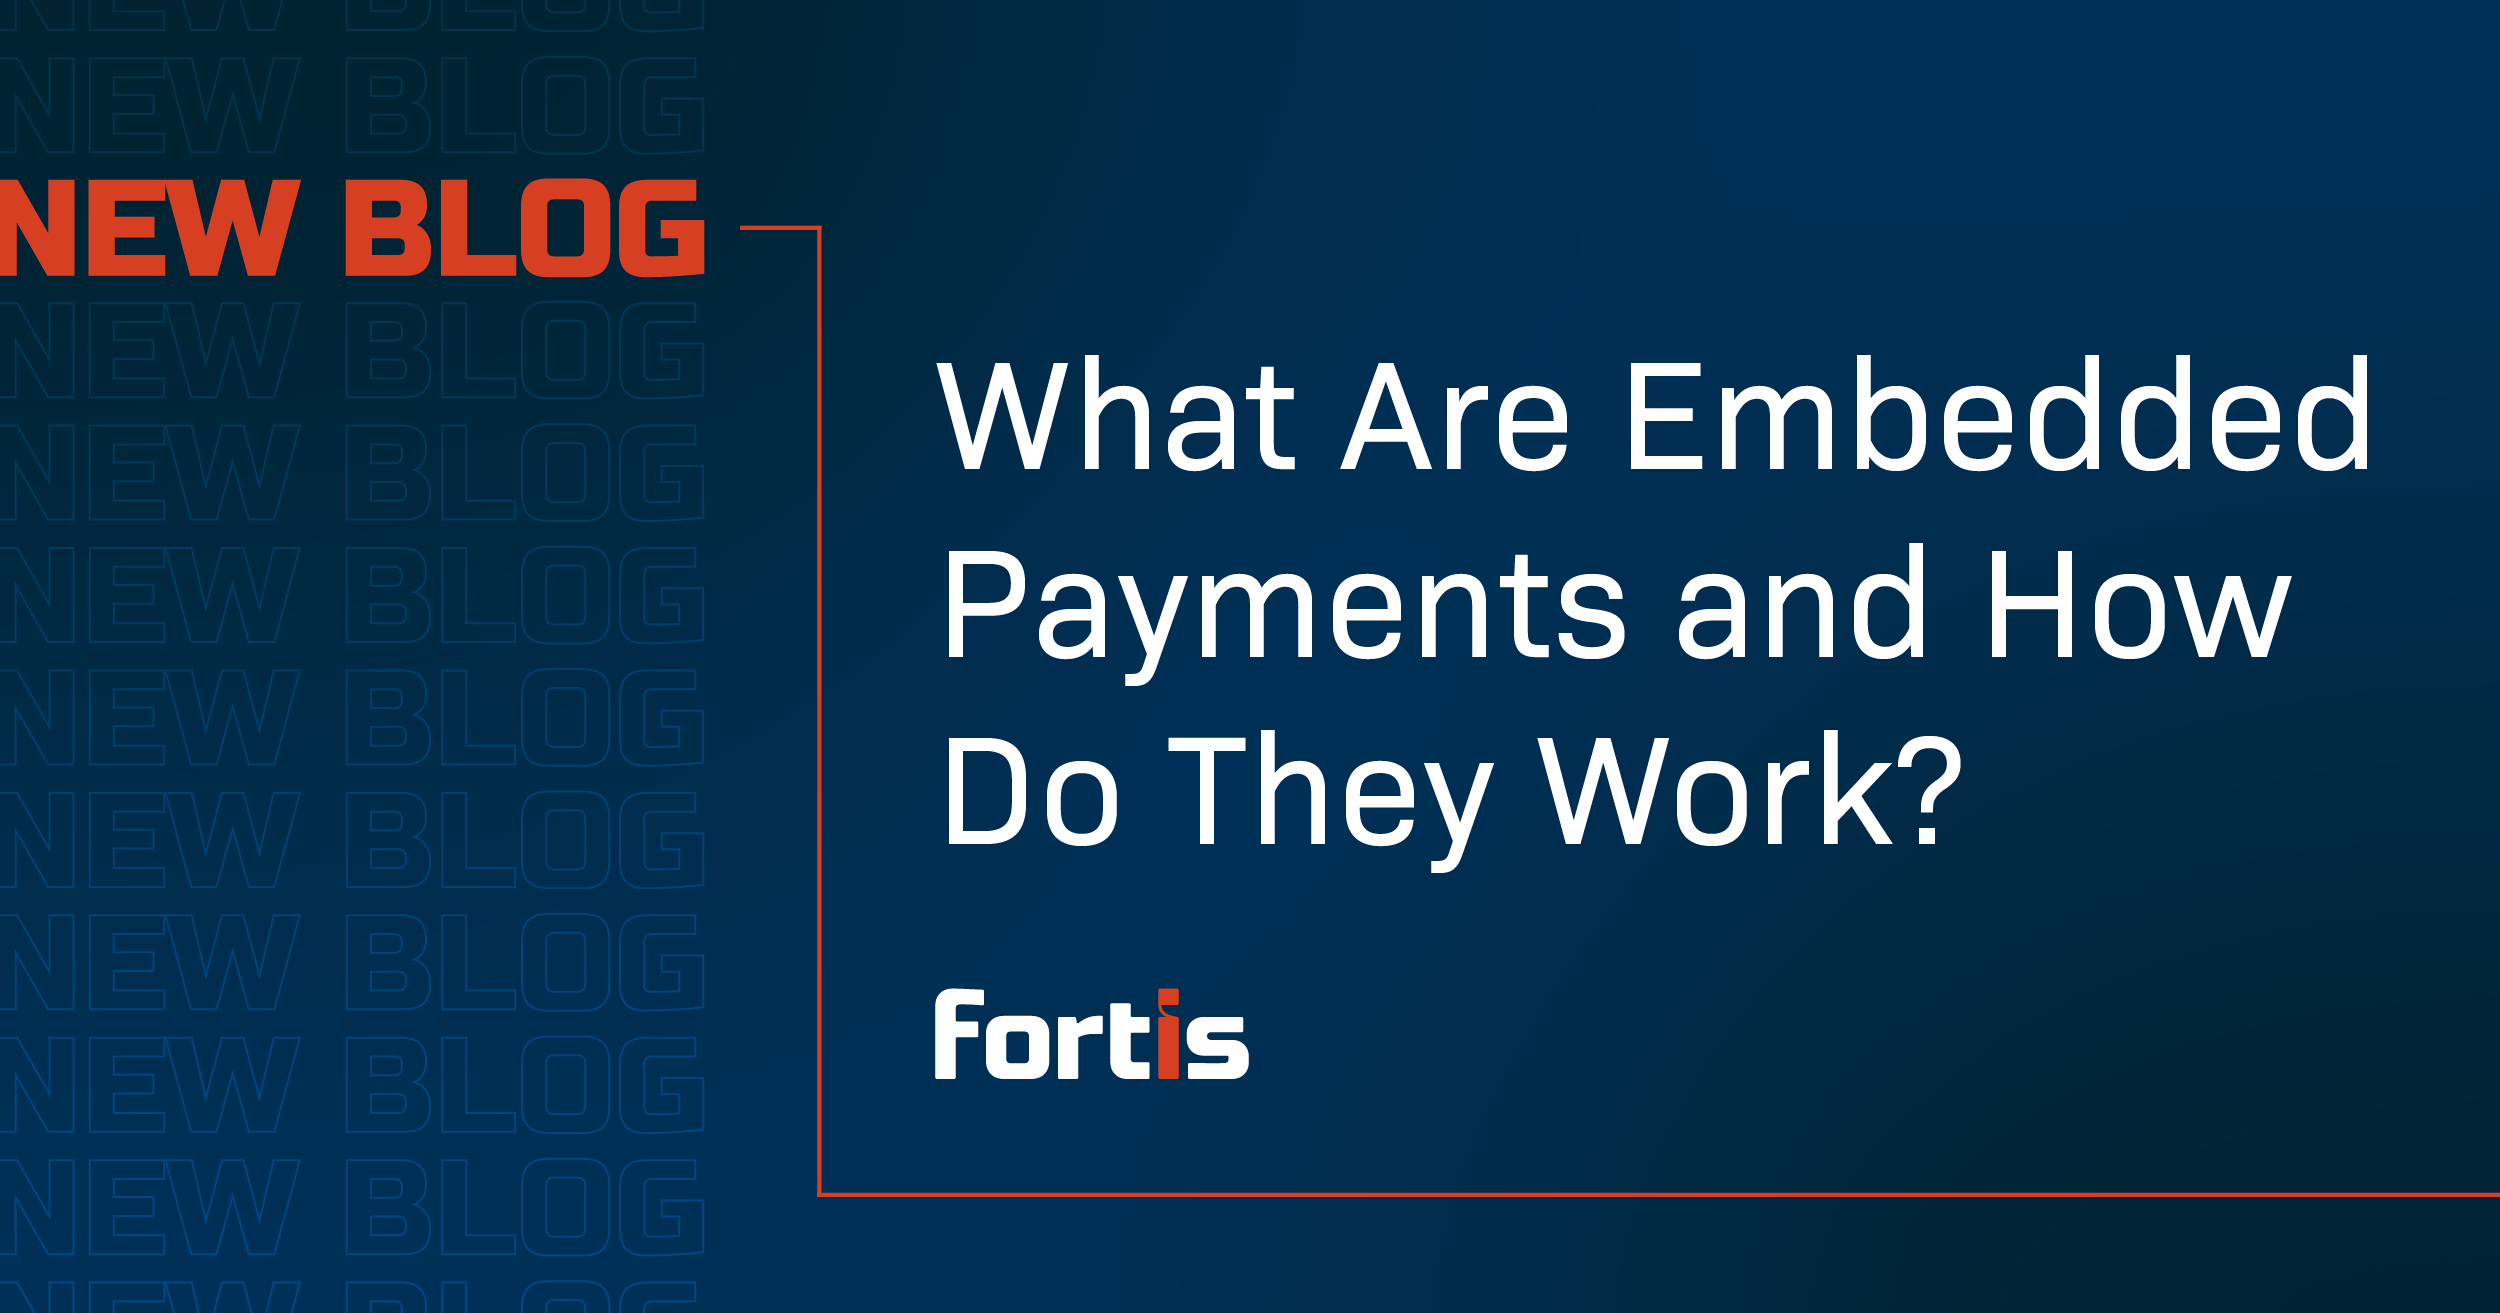 What Are Embedded Payments and How Do They Work? - Featured Image